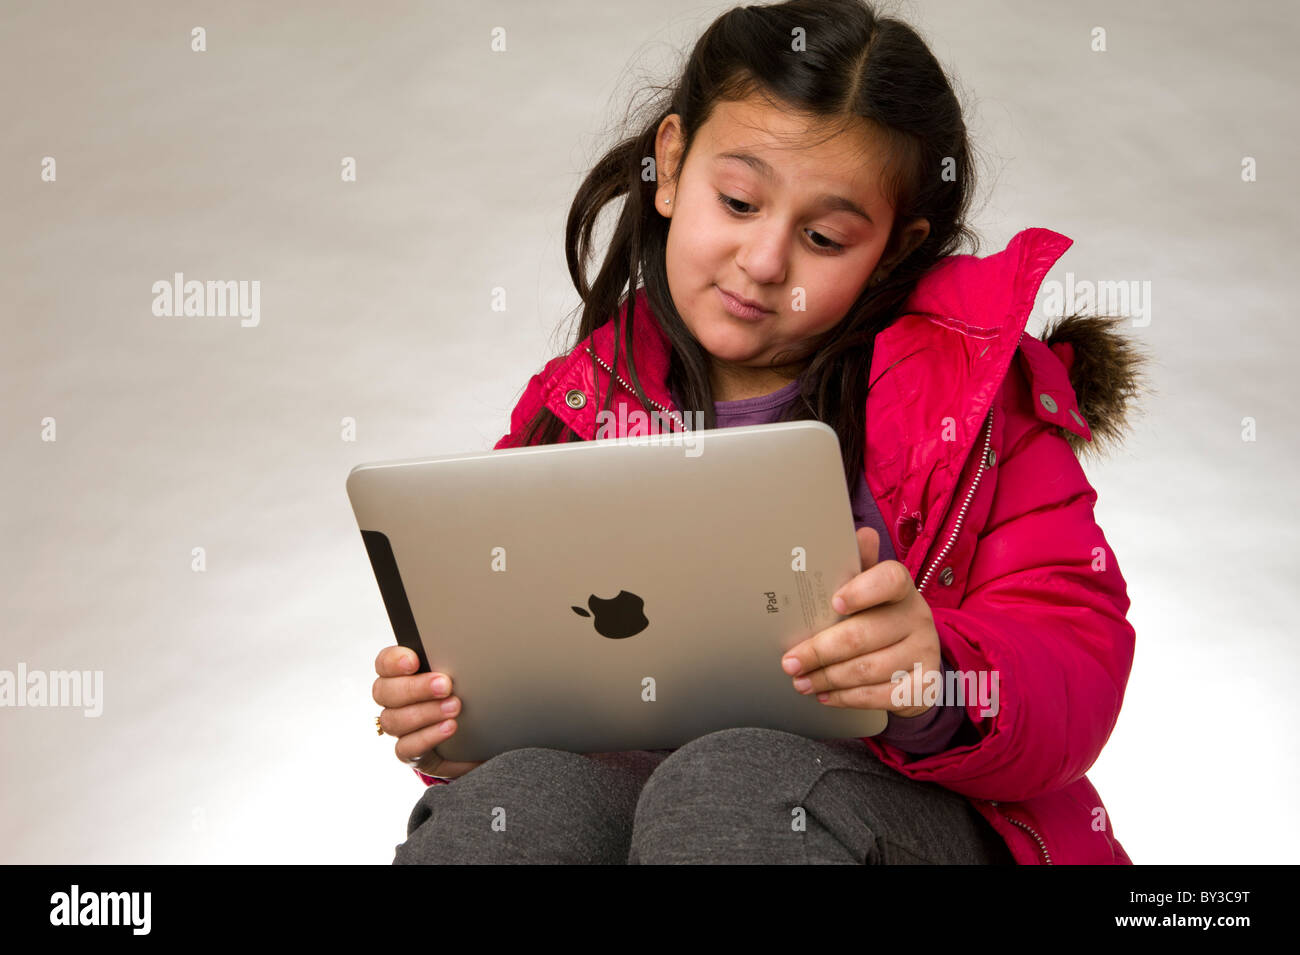 Studio shot of a young girl wearing a red coat and  playing a game on the touch pad screen of an ipad Stock Photo